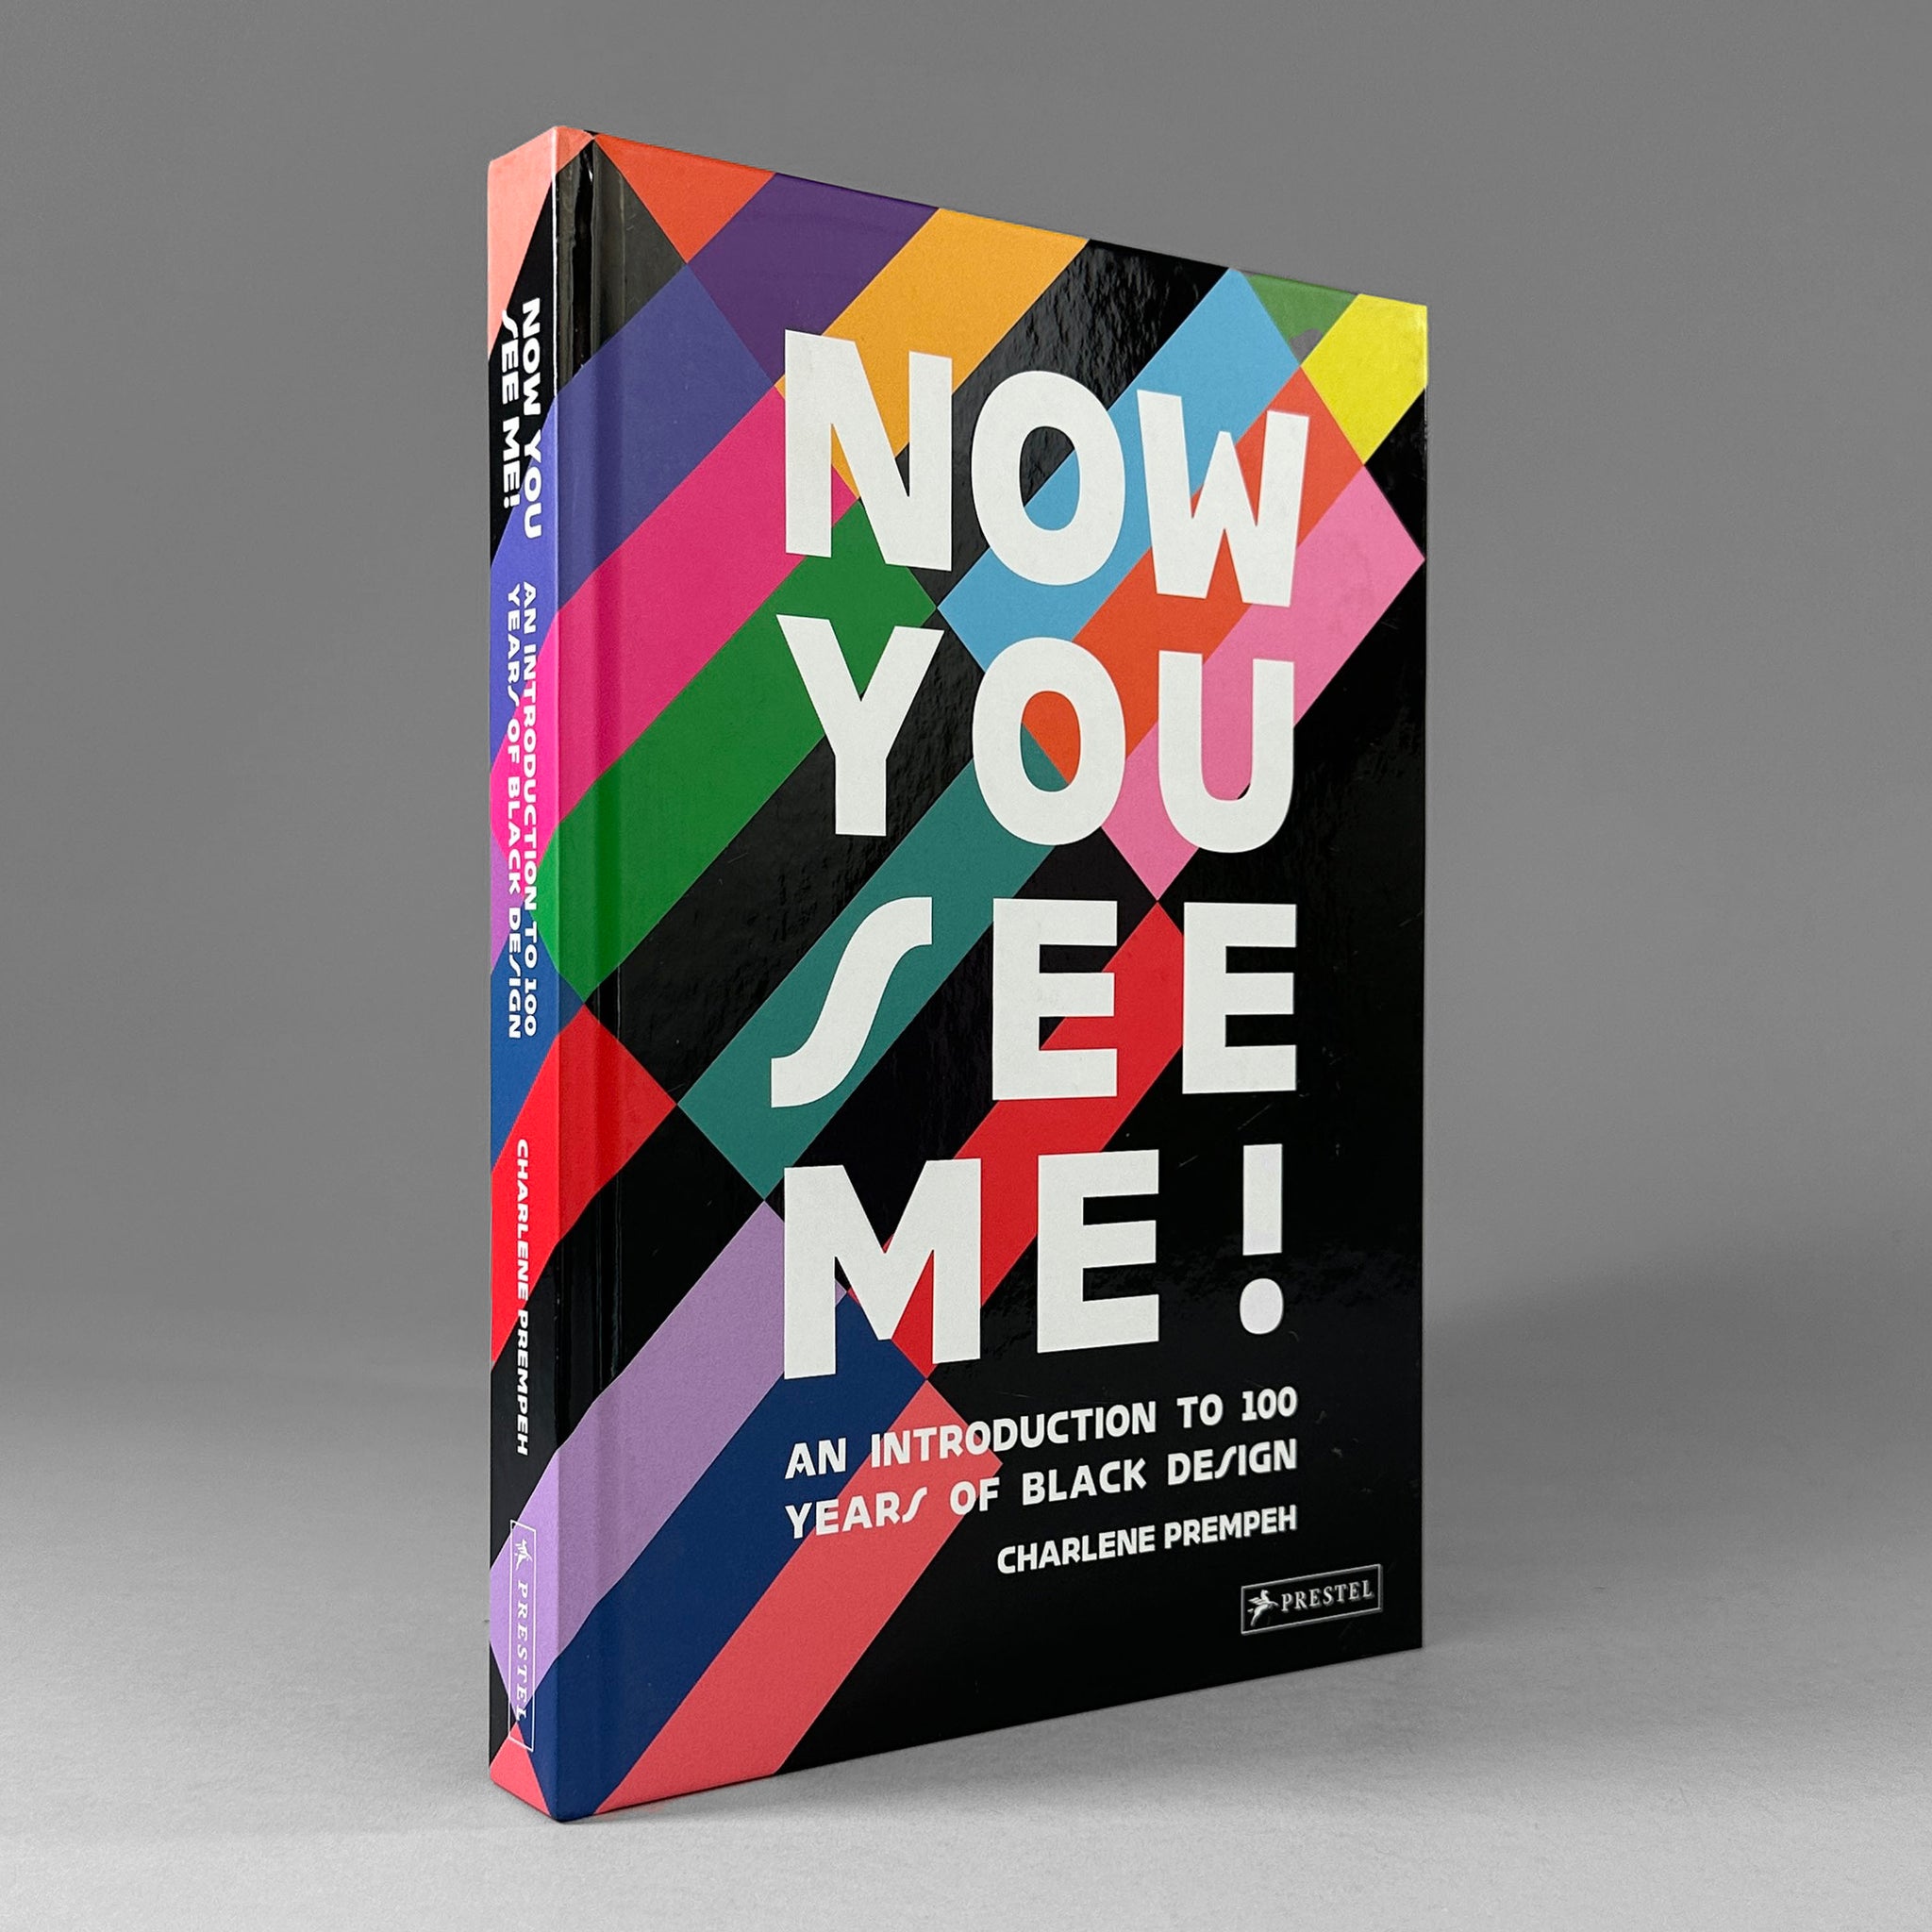 Now You See Me! An Introduction to 100 Years of Black Design